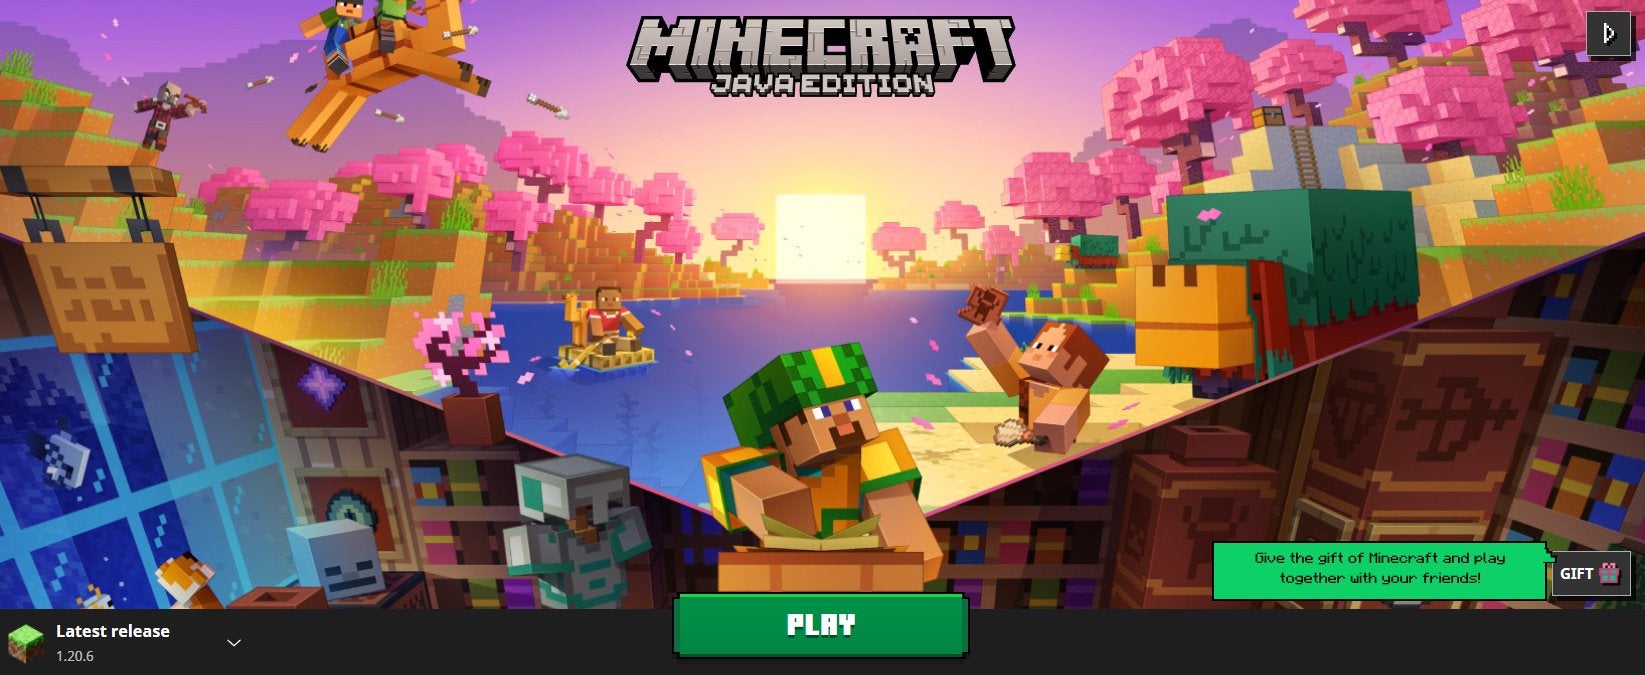 The art for the Minecraft Launcher showing a sunrise amidst cherry blossom trees.